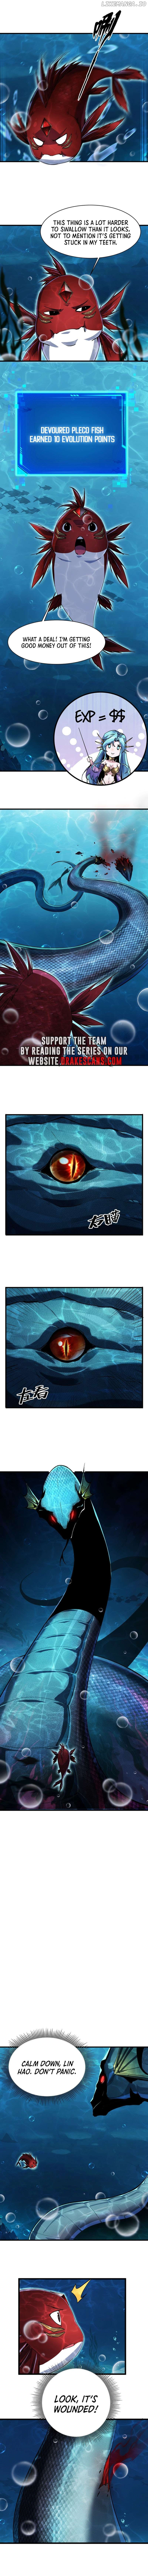 Evolution from Carp to Divine Dragon Chapter 4 - page 3